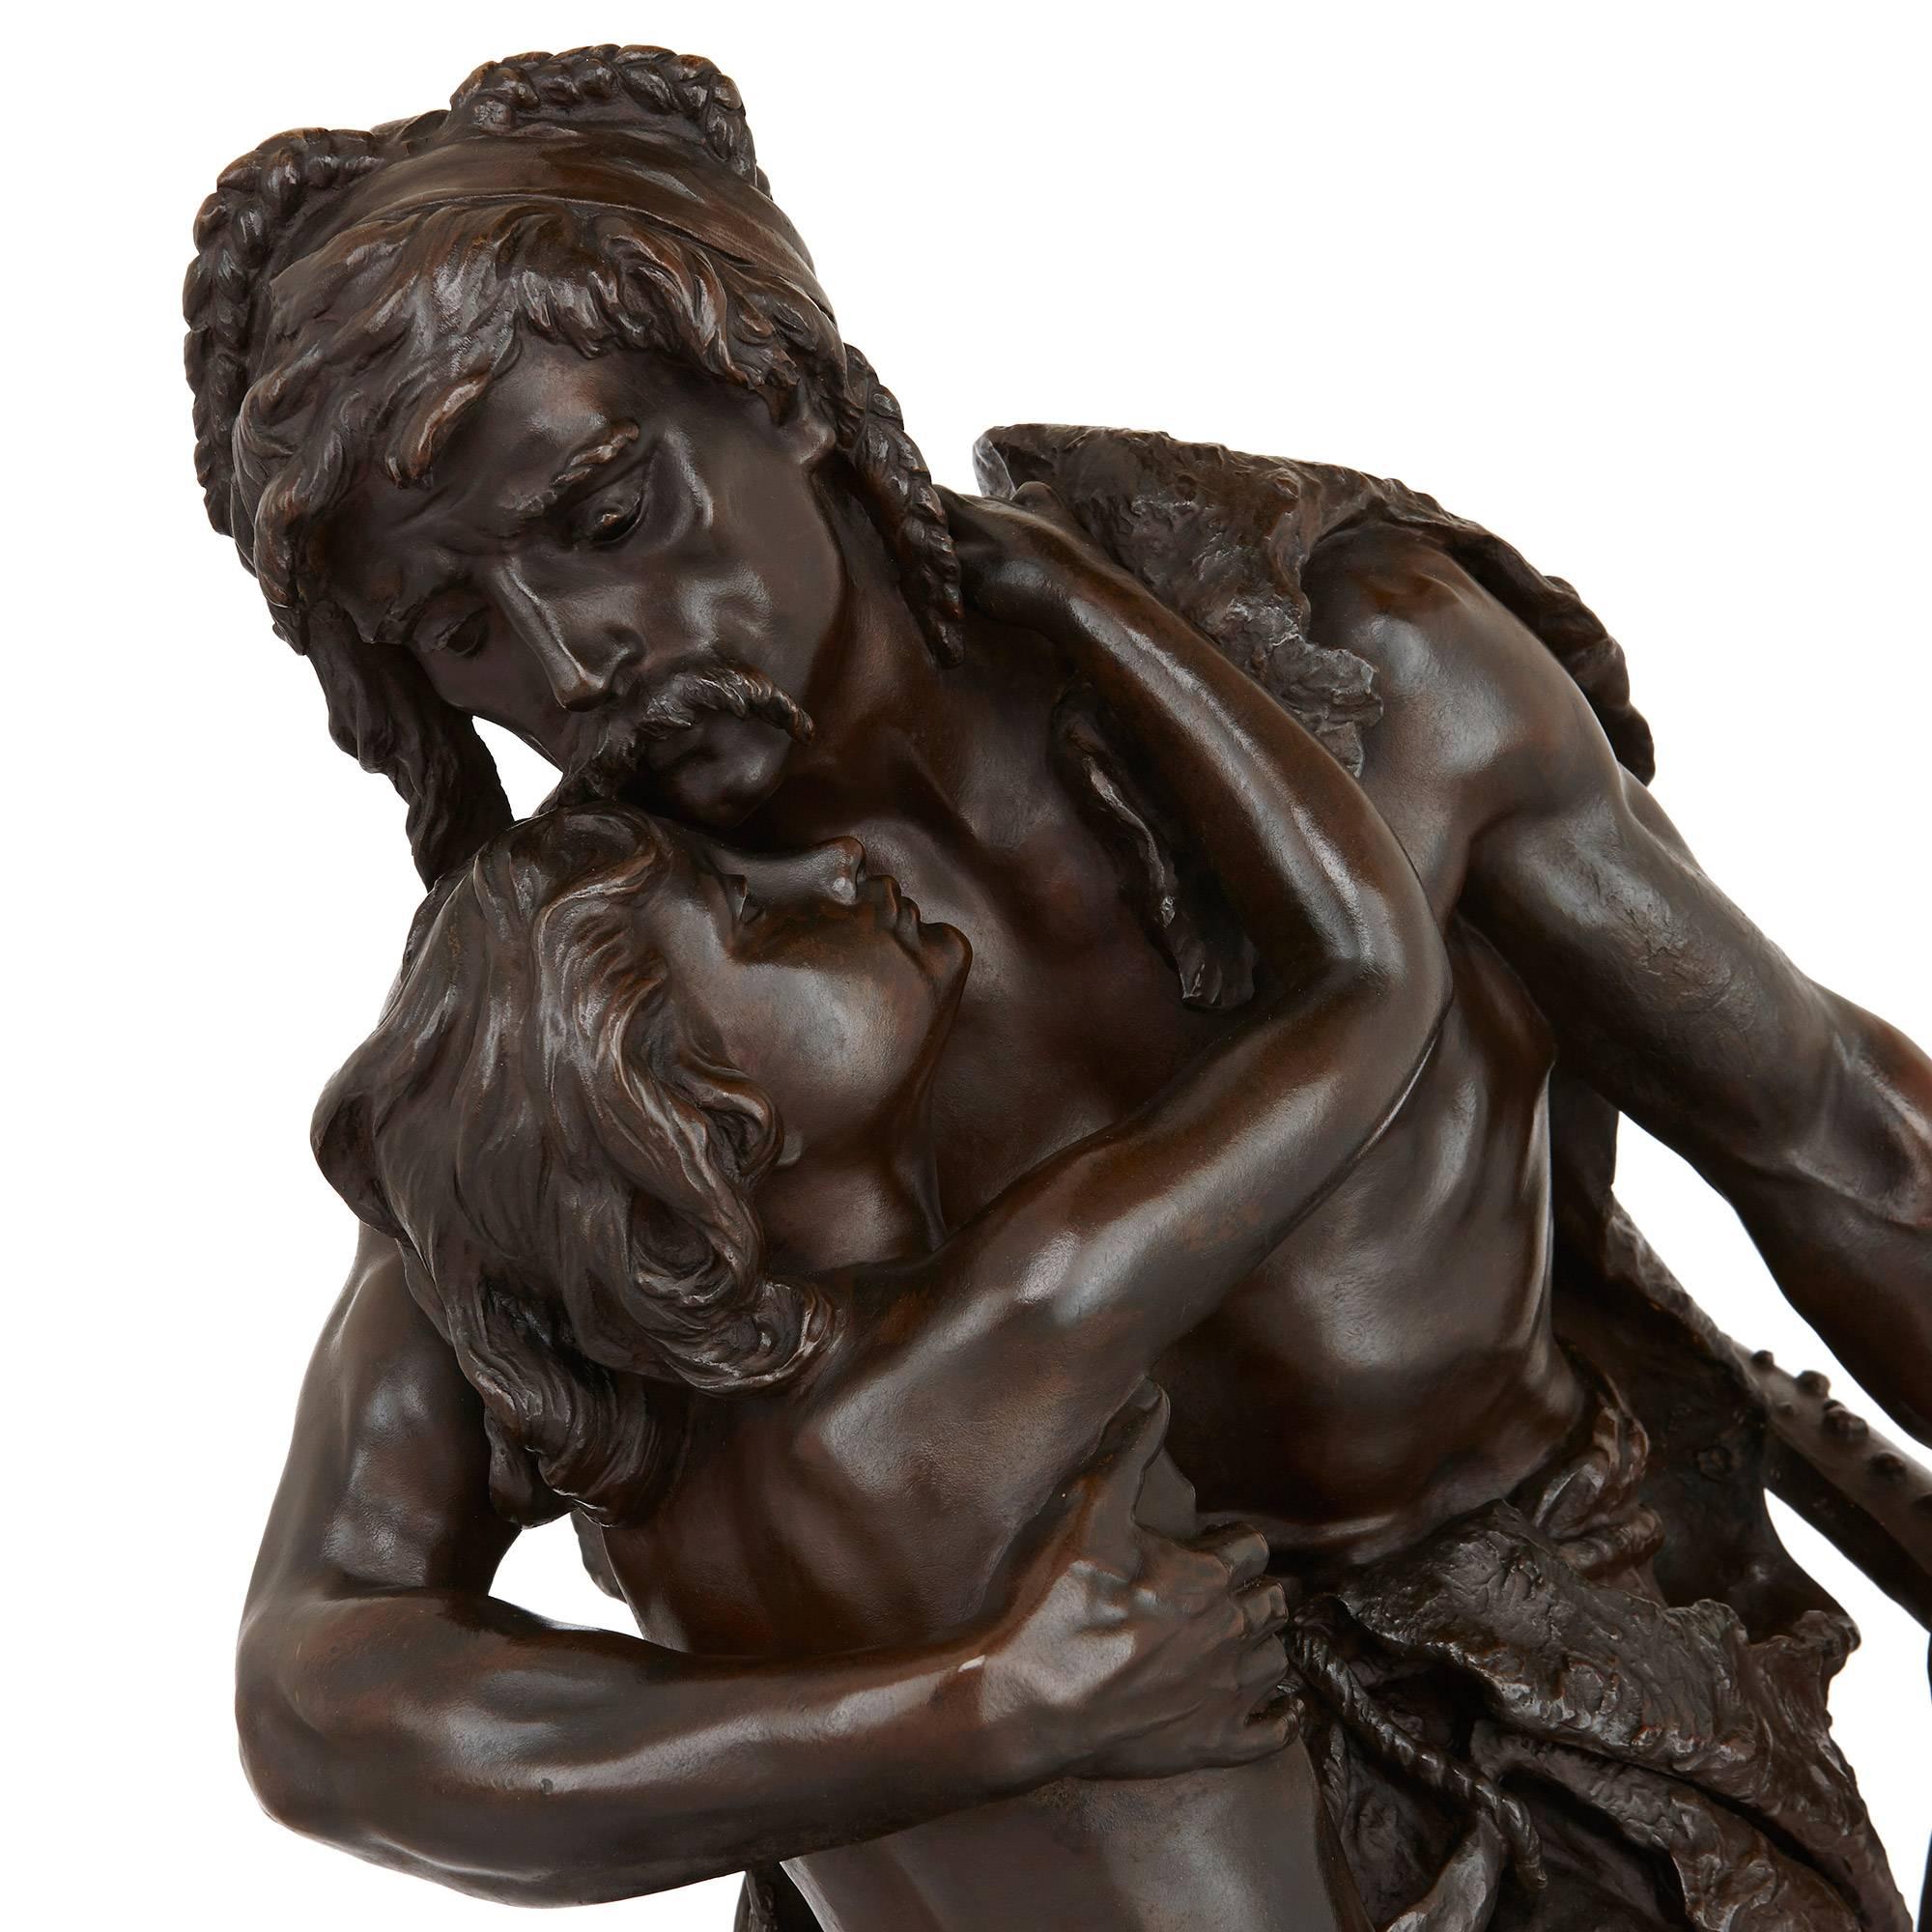 This beautiful antique French sculpture depicts a tender moment between father and son. Made of fine patinated bronze, the full length figures of father and son are crafted in the naturalistic style that is typical of Plé's work. The father is